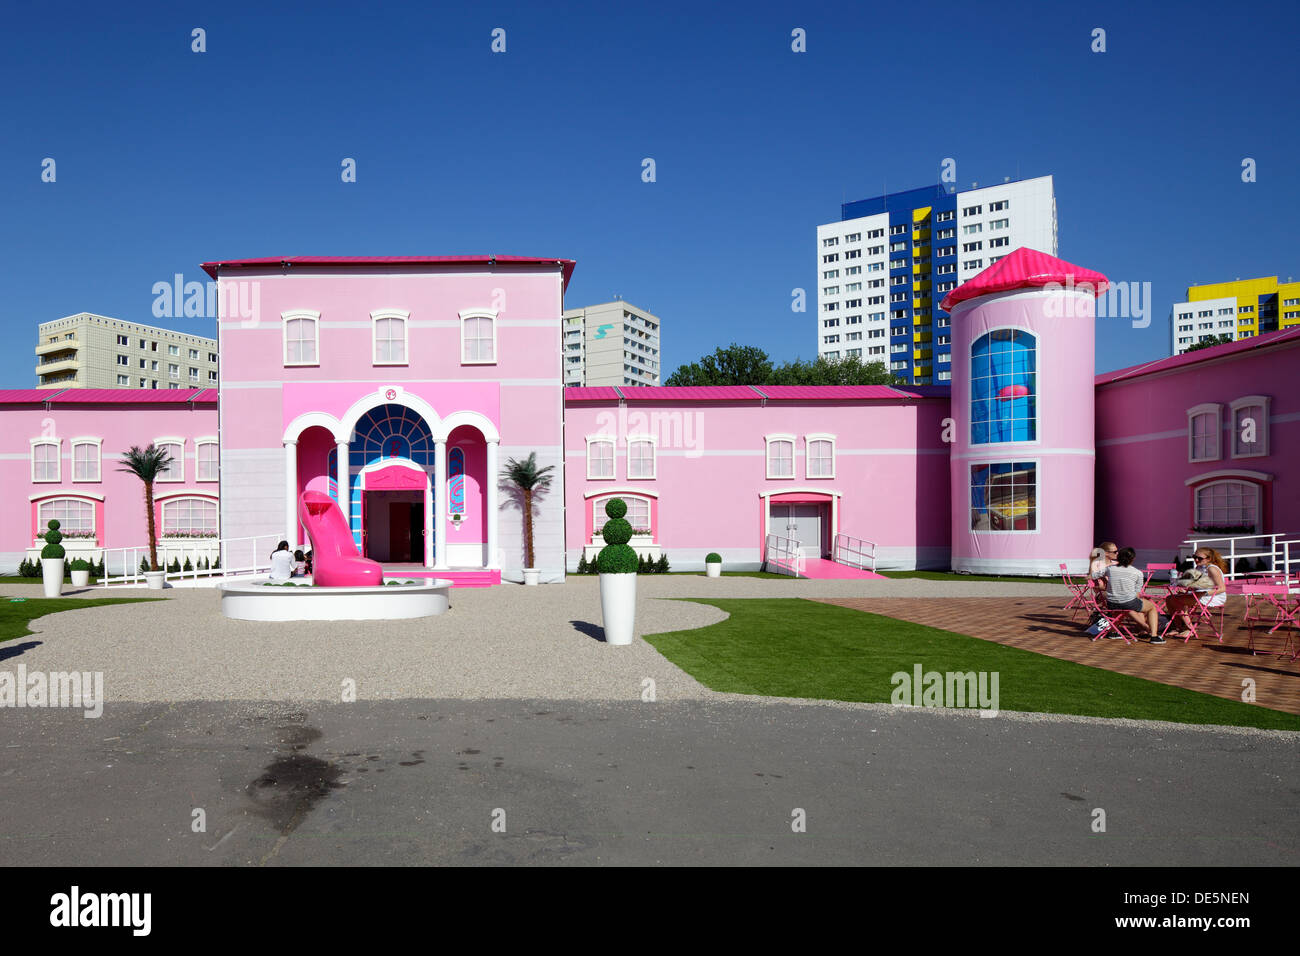 Barbie dream stock photography and images - Alamy